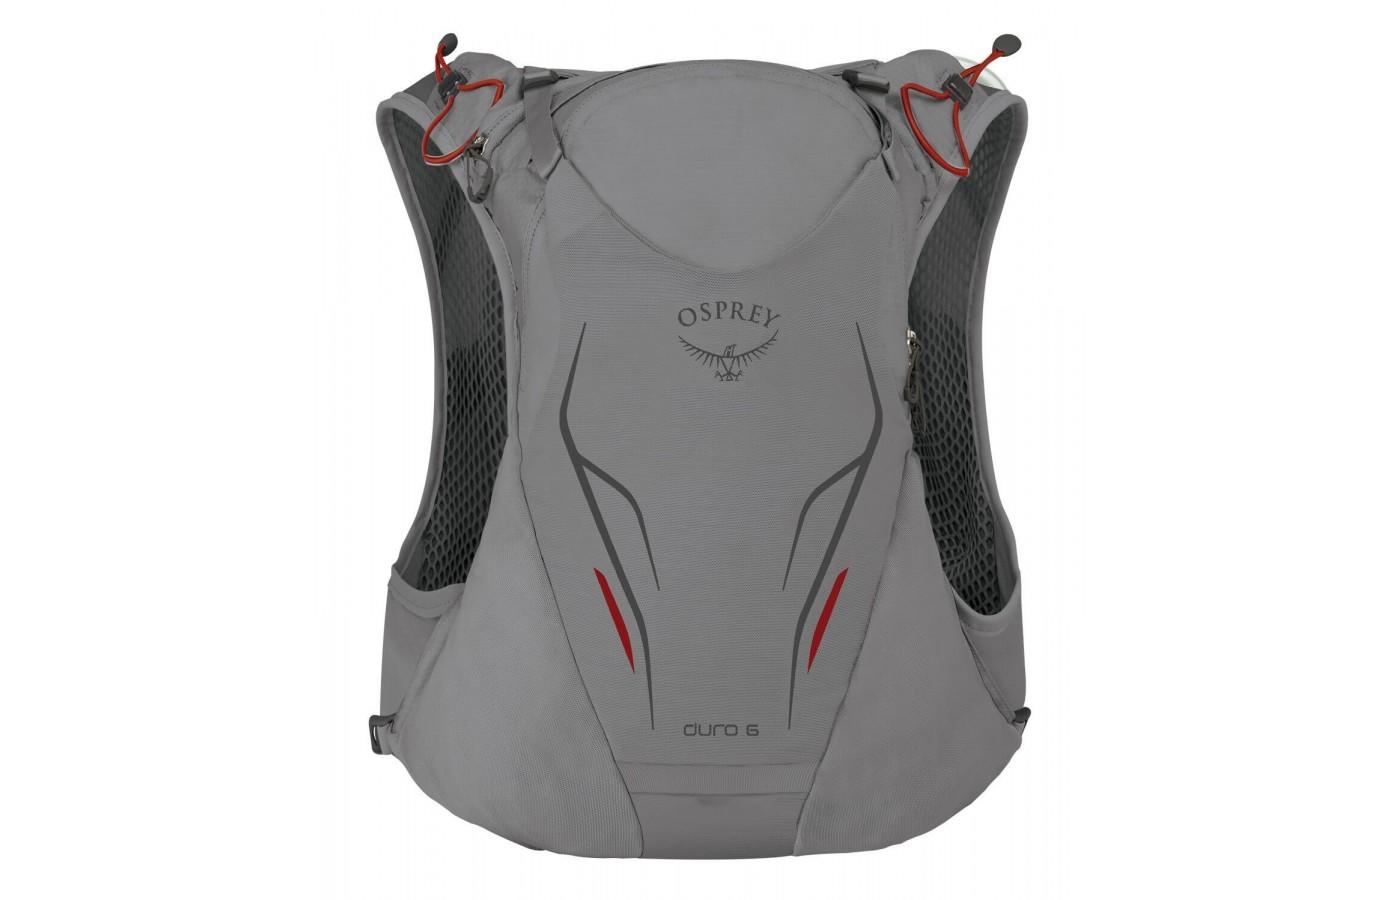 This vest features 7 external pockets to hold all of your necessary items. 